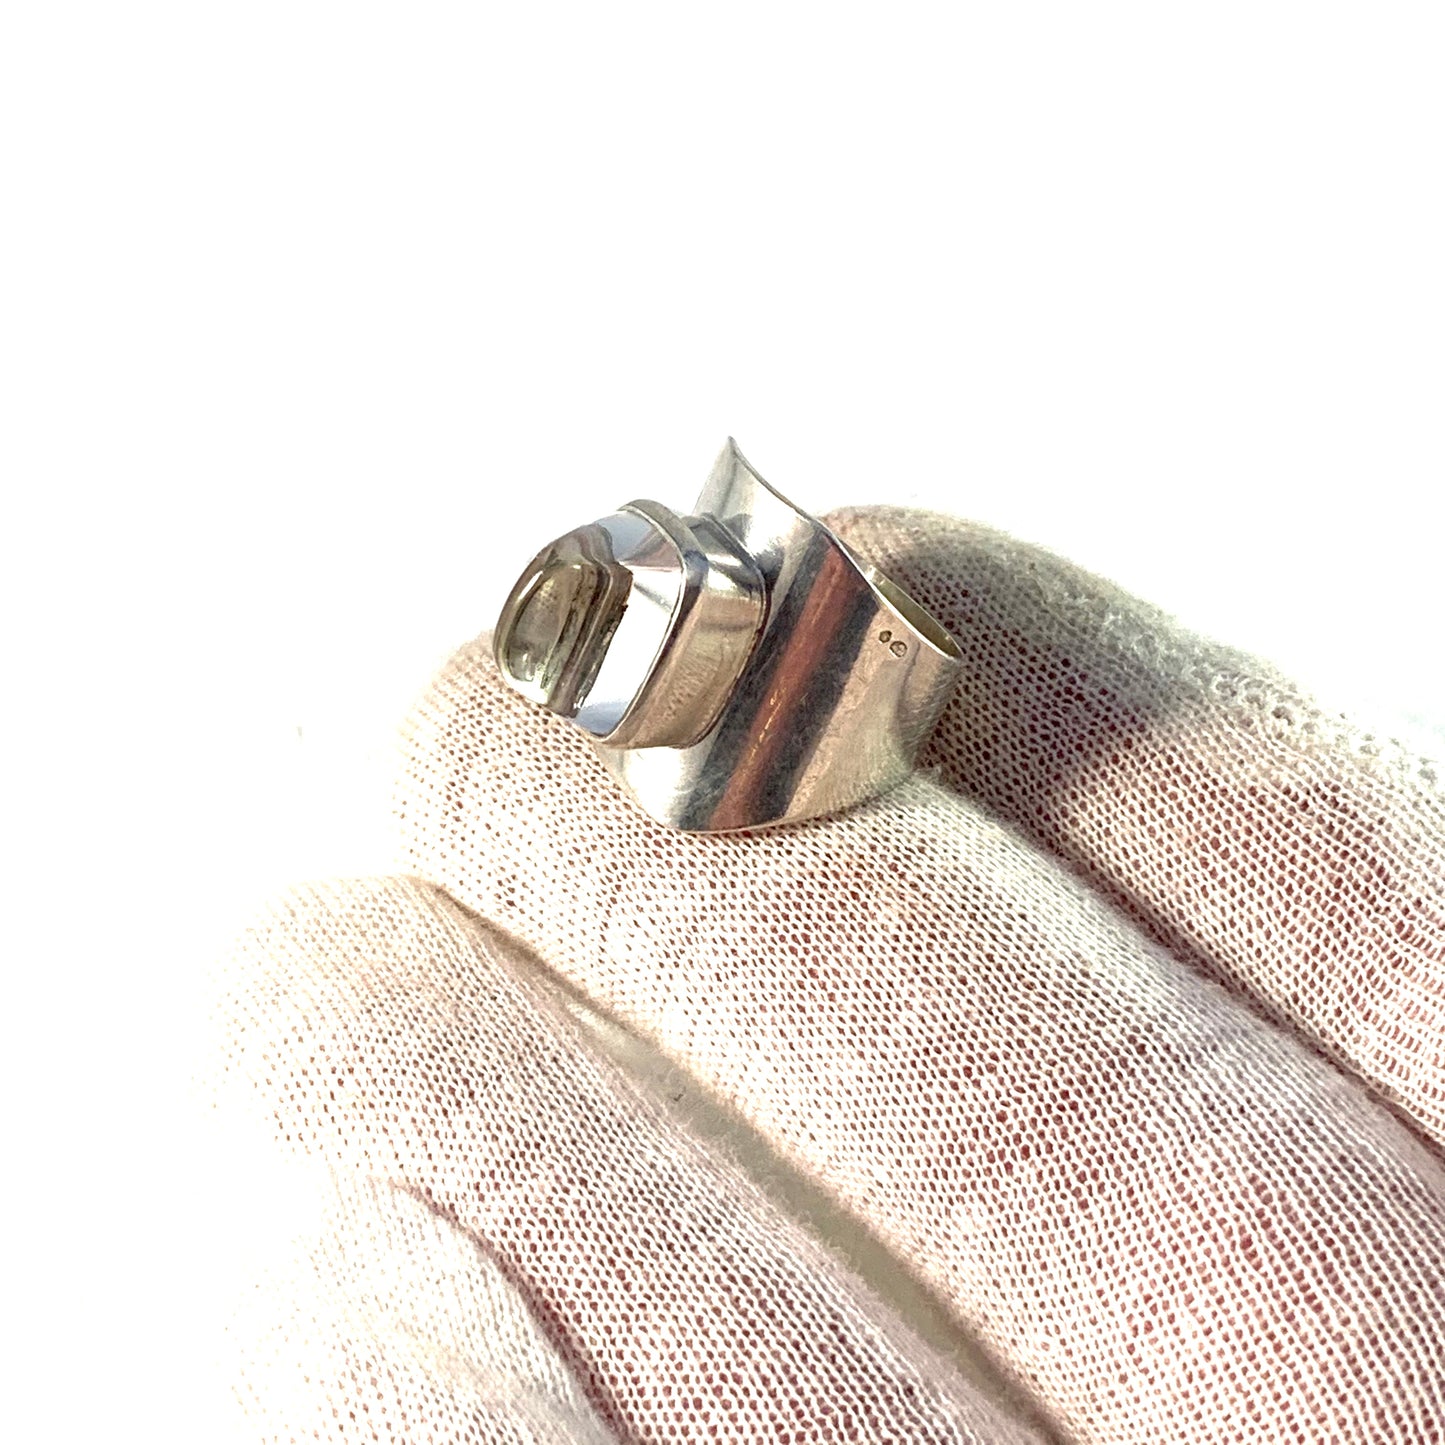 Swedish Import 1960s Solid 835 Silver Acrylic Modernist Space Age Ring.